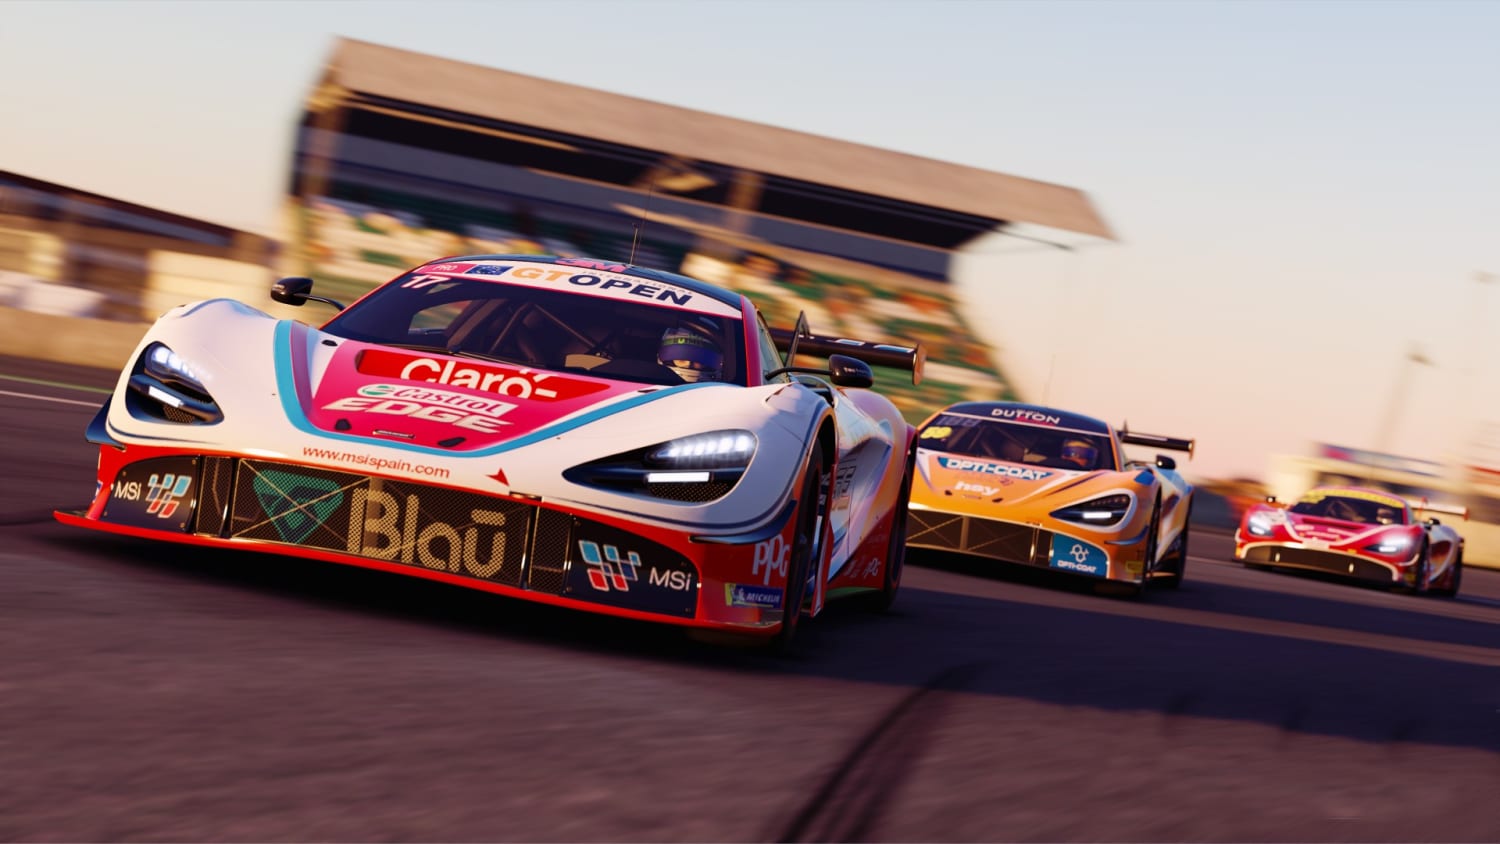 Project CARS 3 -- 5 Beginner's tips and how to improve your driving